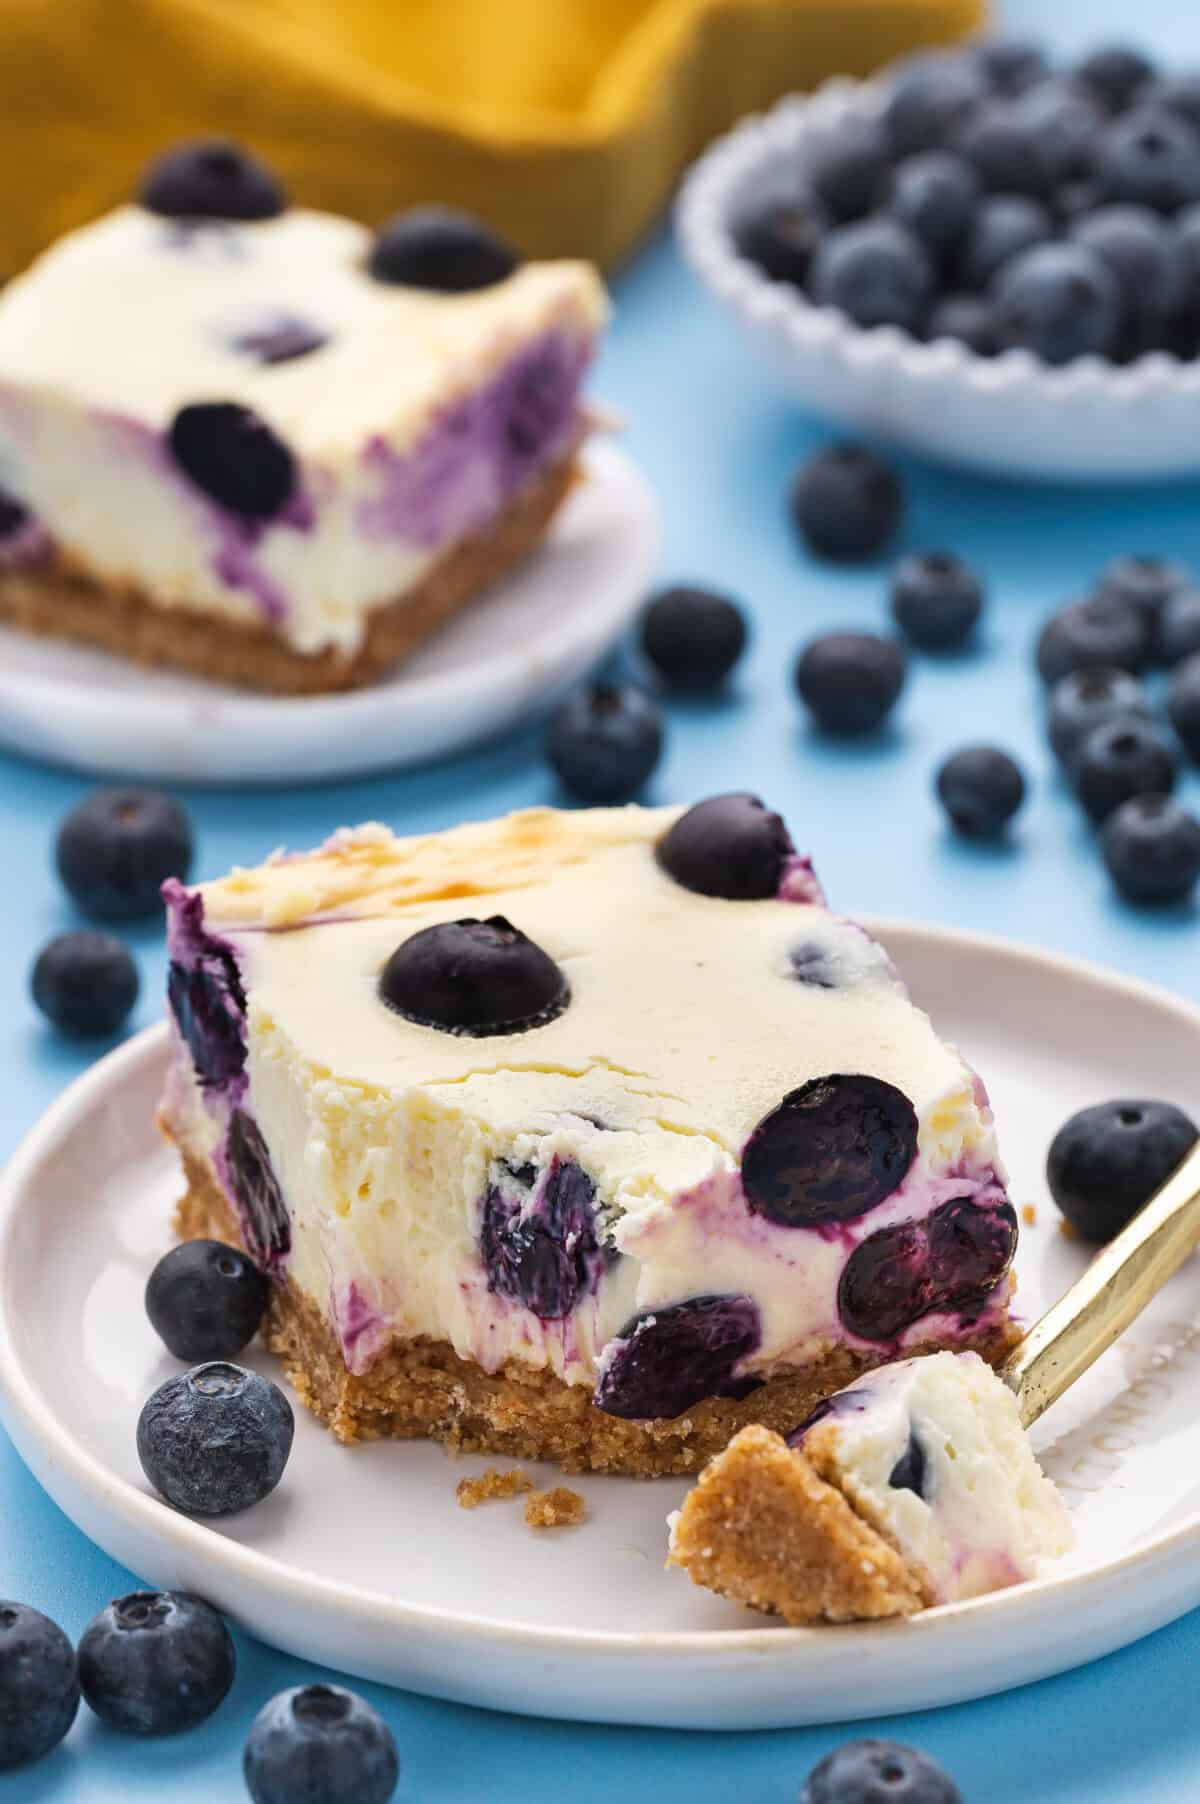 A slice of blueberry cheesecake on a plate with a fork.